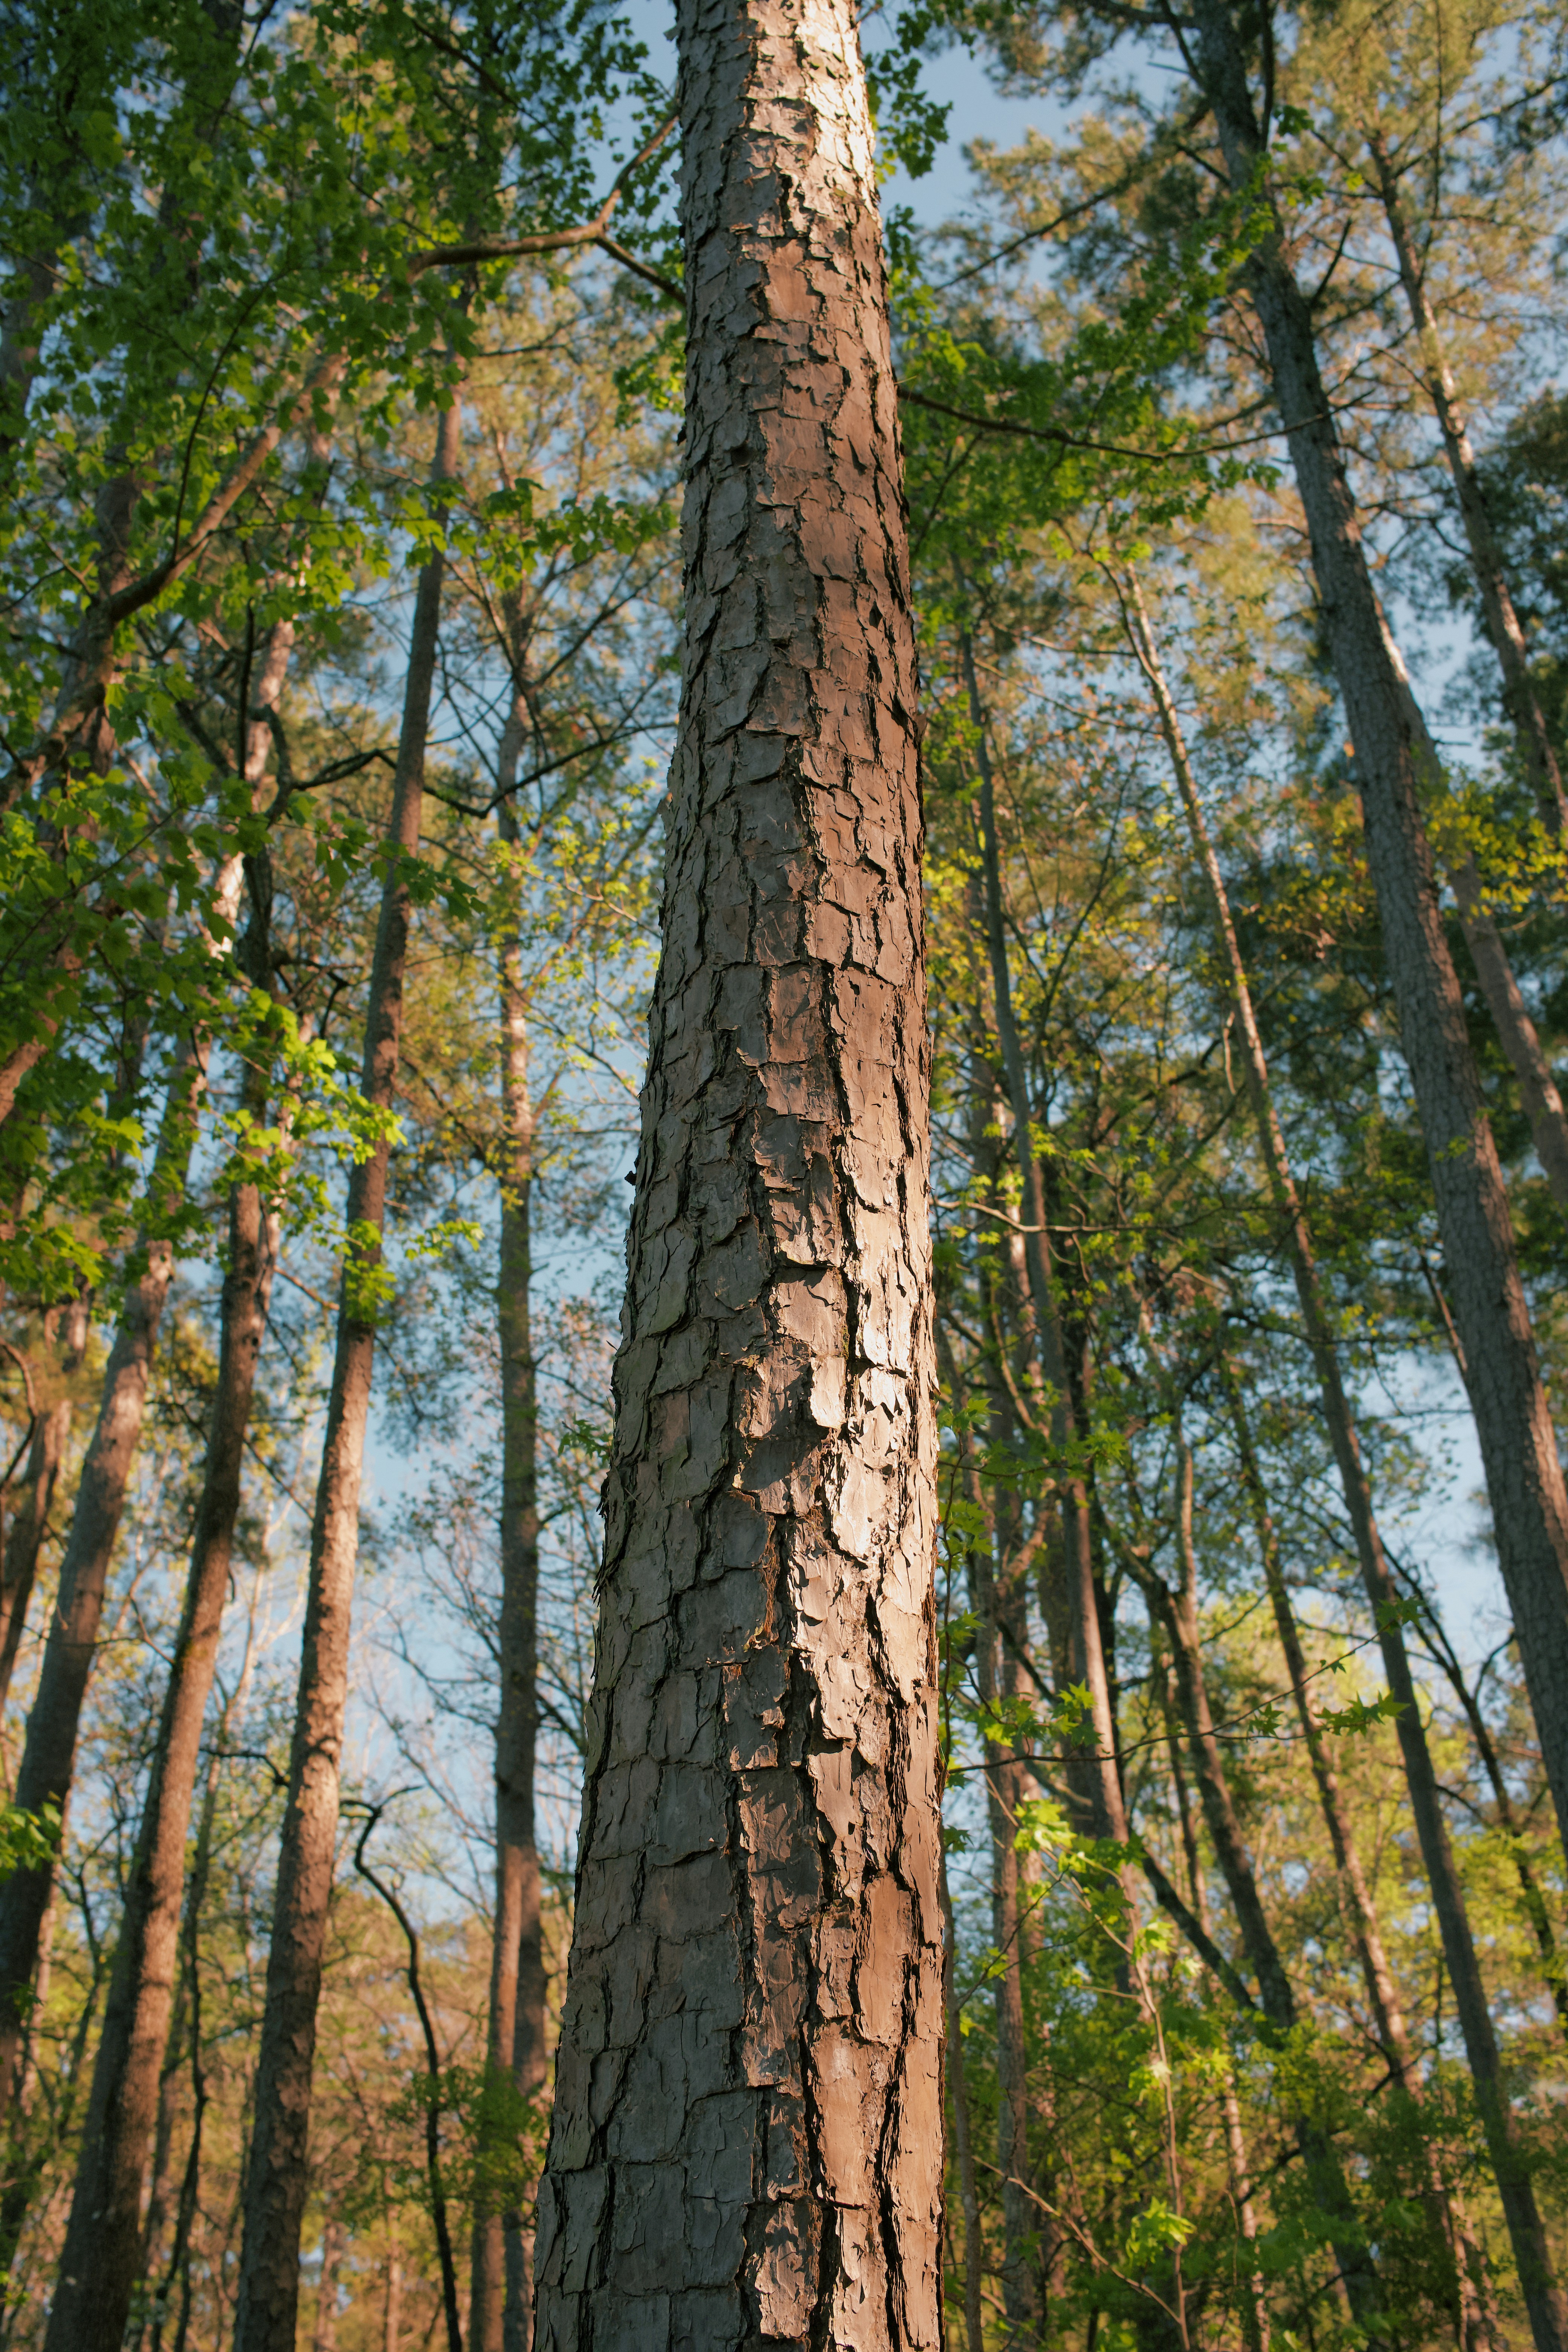 Choose from a curated selection of tree photos. Always free on Unsplash.